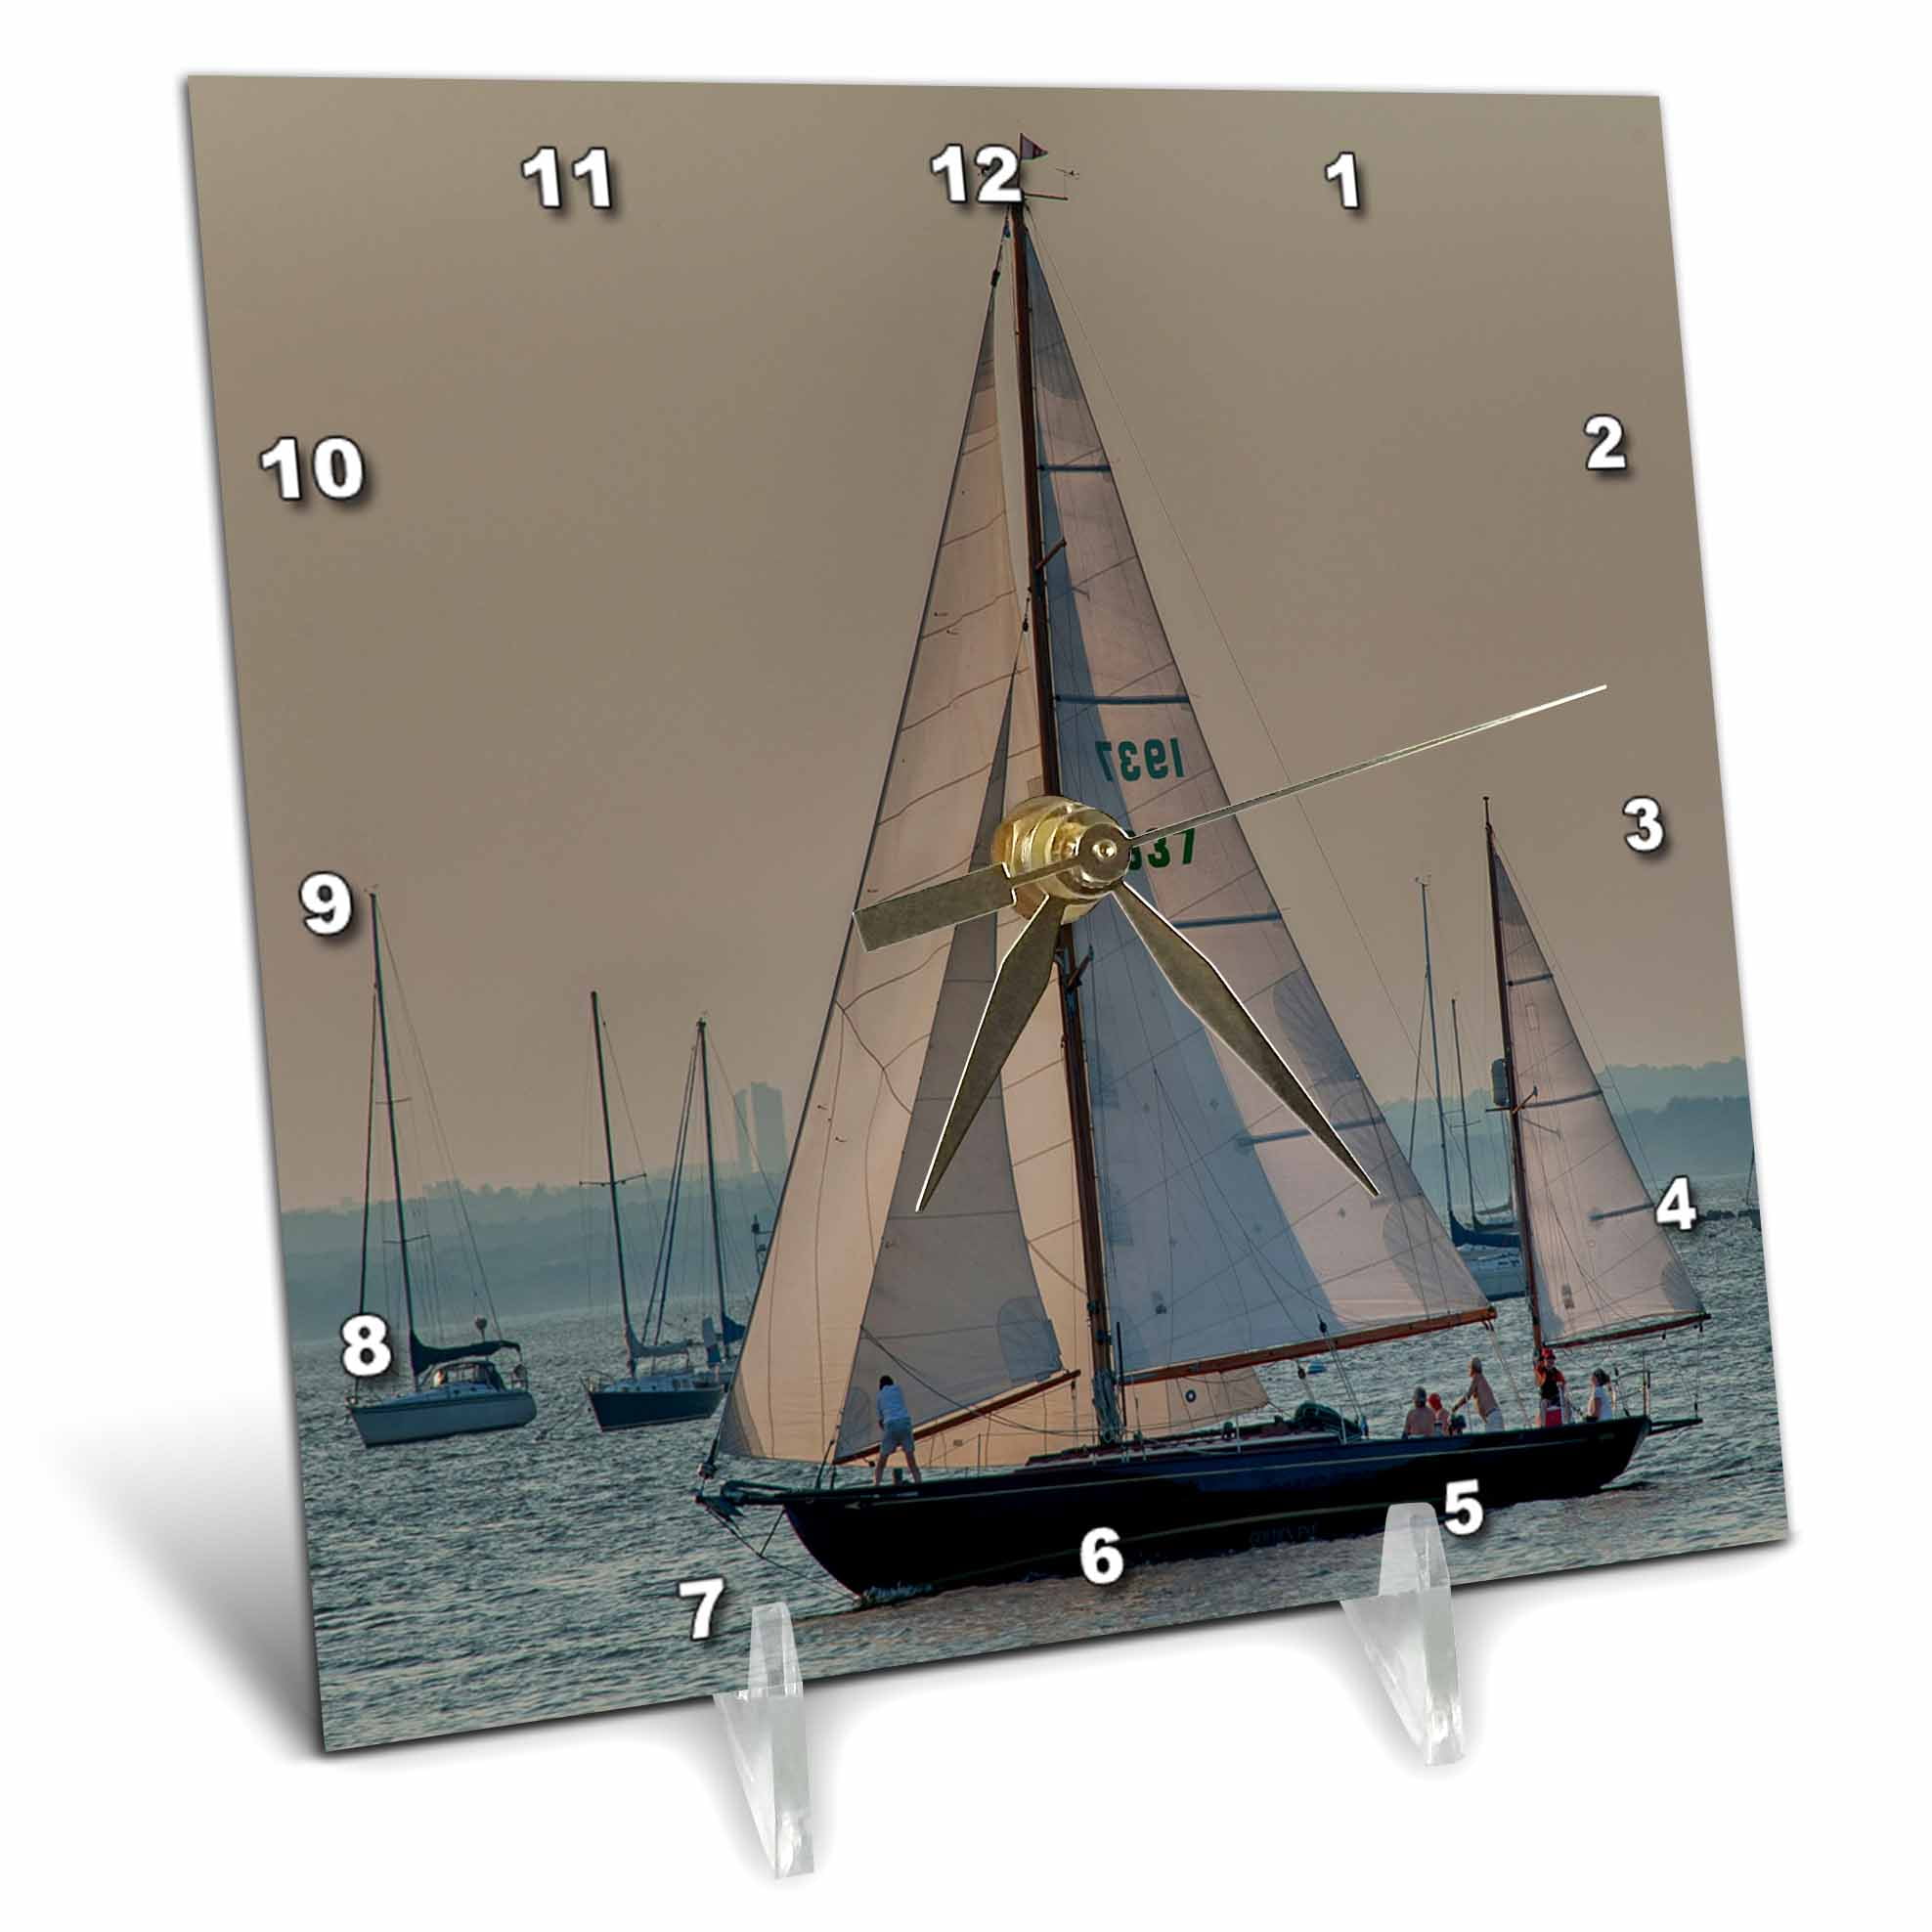 3dRose Sail Boats Desk Clock 6 by 6-Inch 